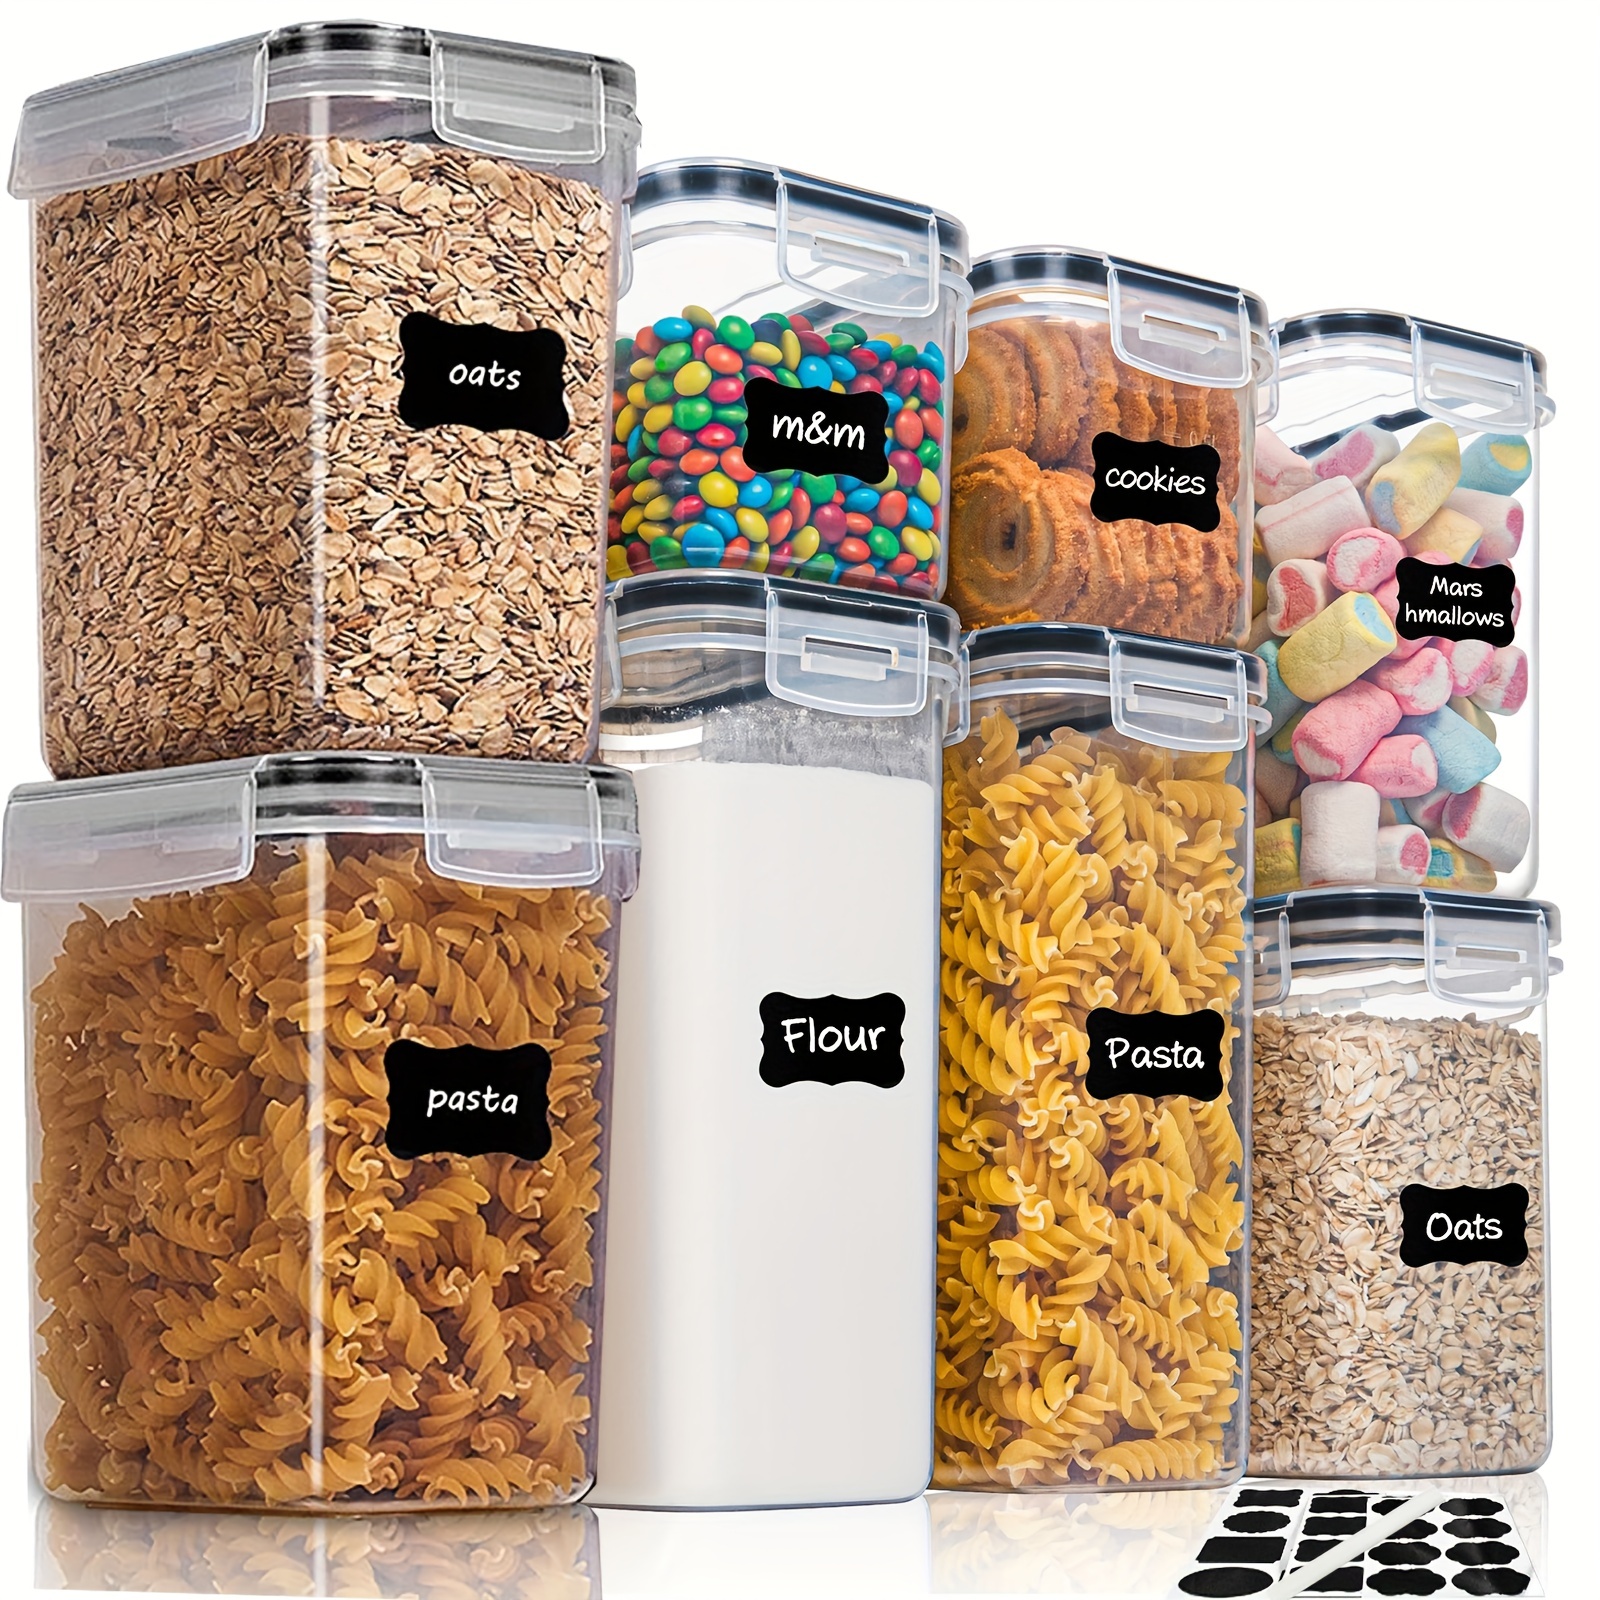 Organize Your Kitchen Pantry With Our Airtight Food Storage Containers ...